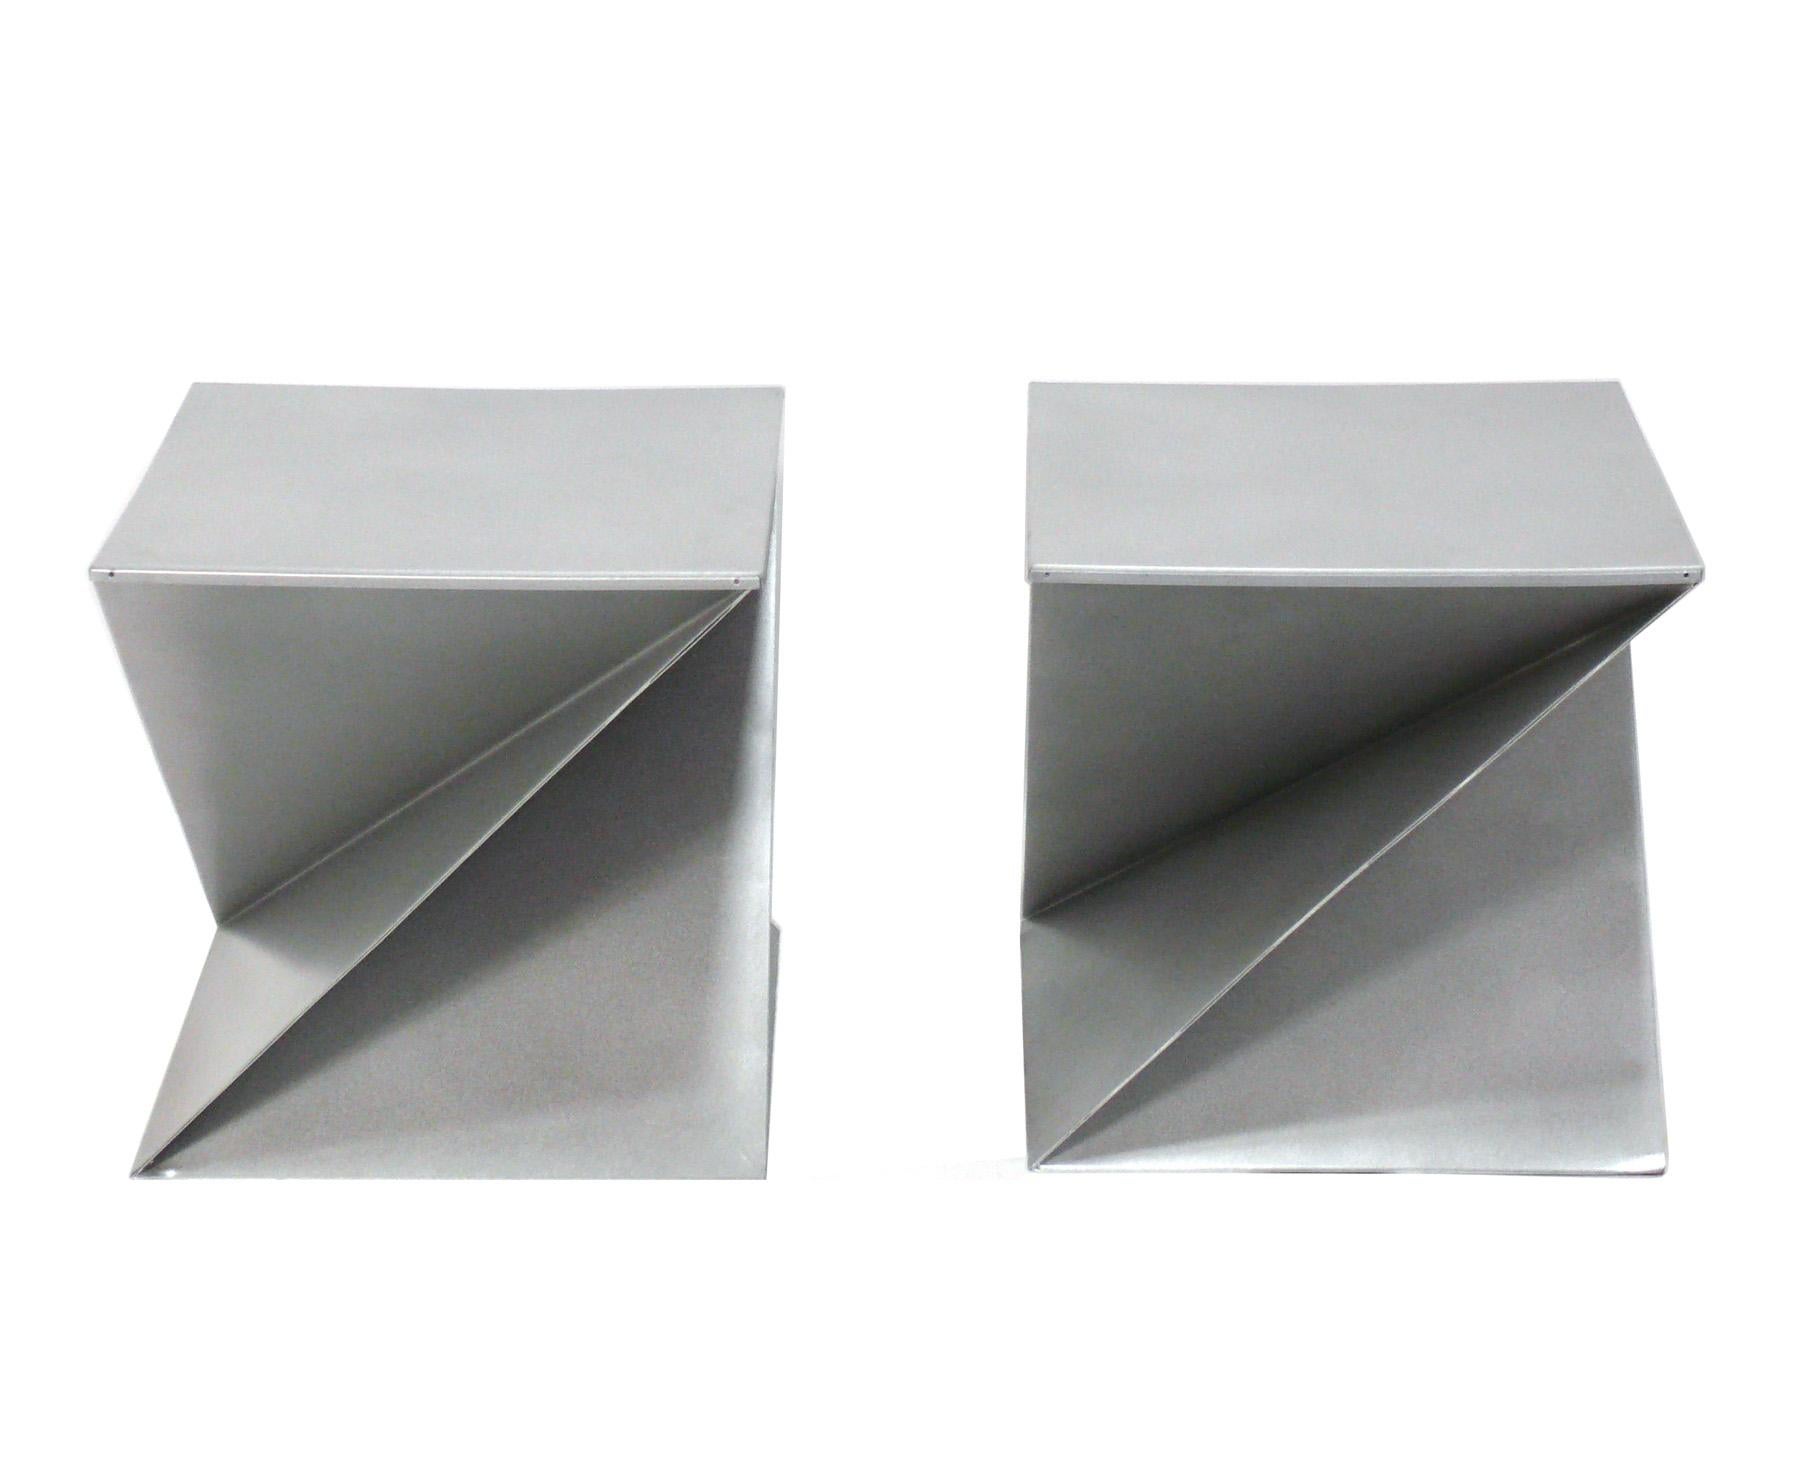 Pair of sculptural origami folded metal end tables, France, circa 1970s. They are constructed of silver enameled metal. The tabletop of each removes to reveal a hidden storage area. They are a versatile size and can be used as end or side tables, or